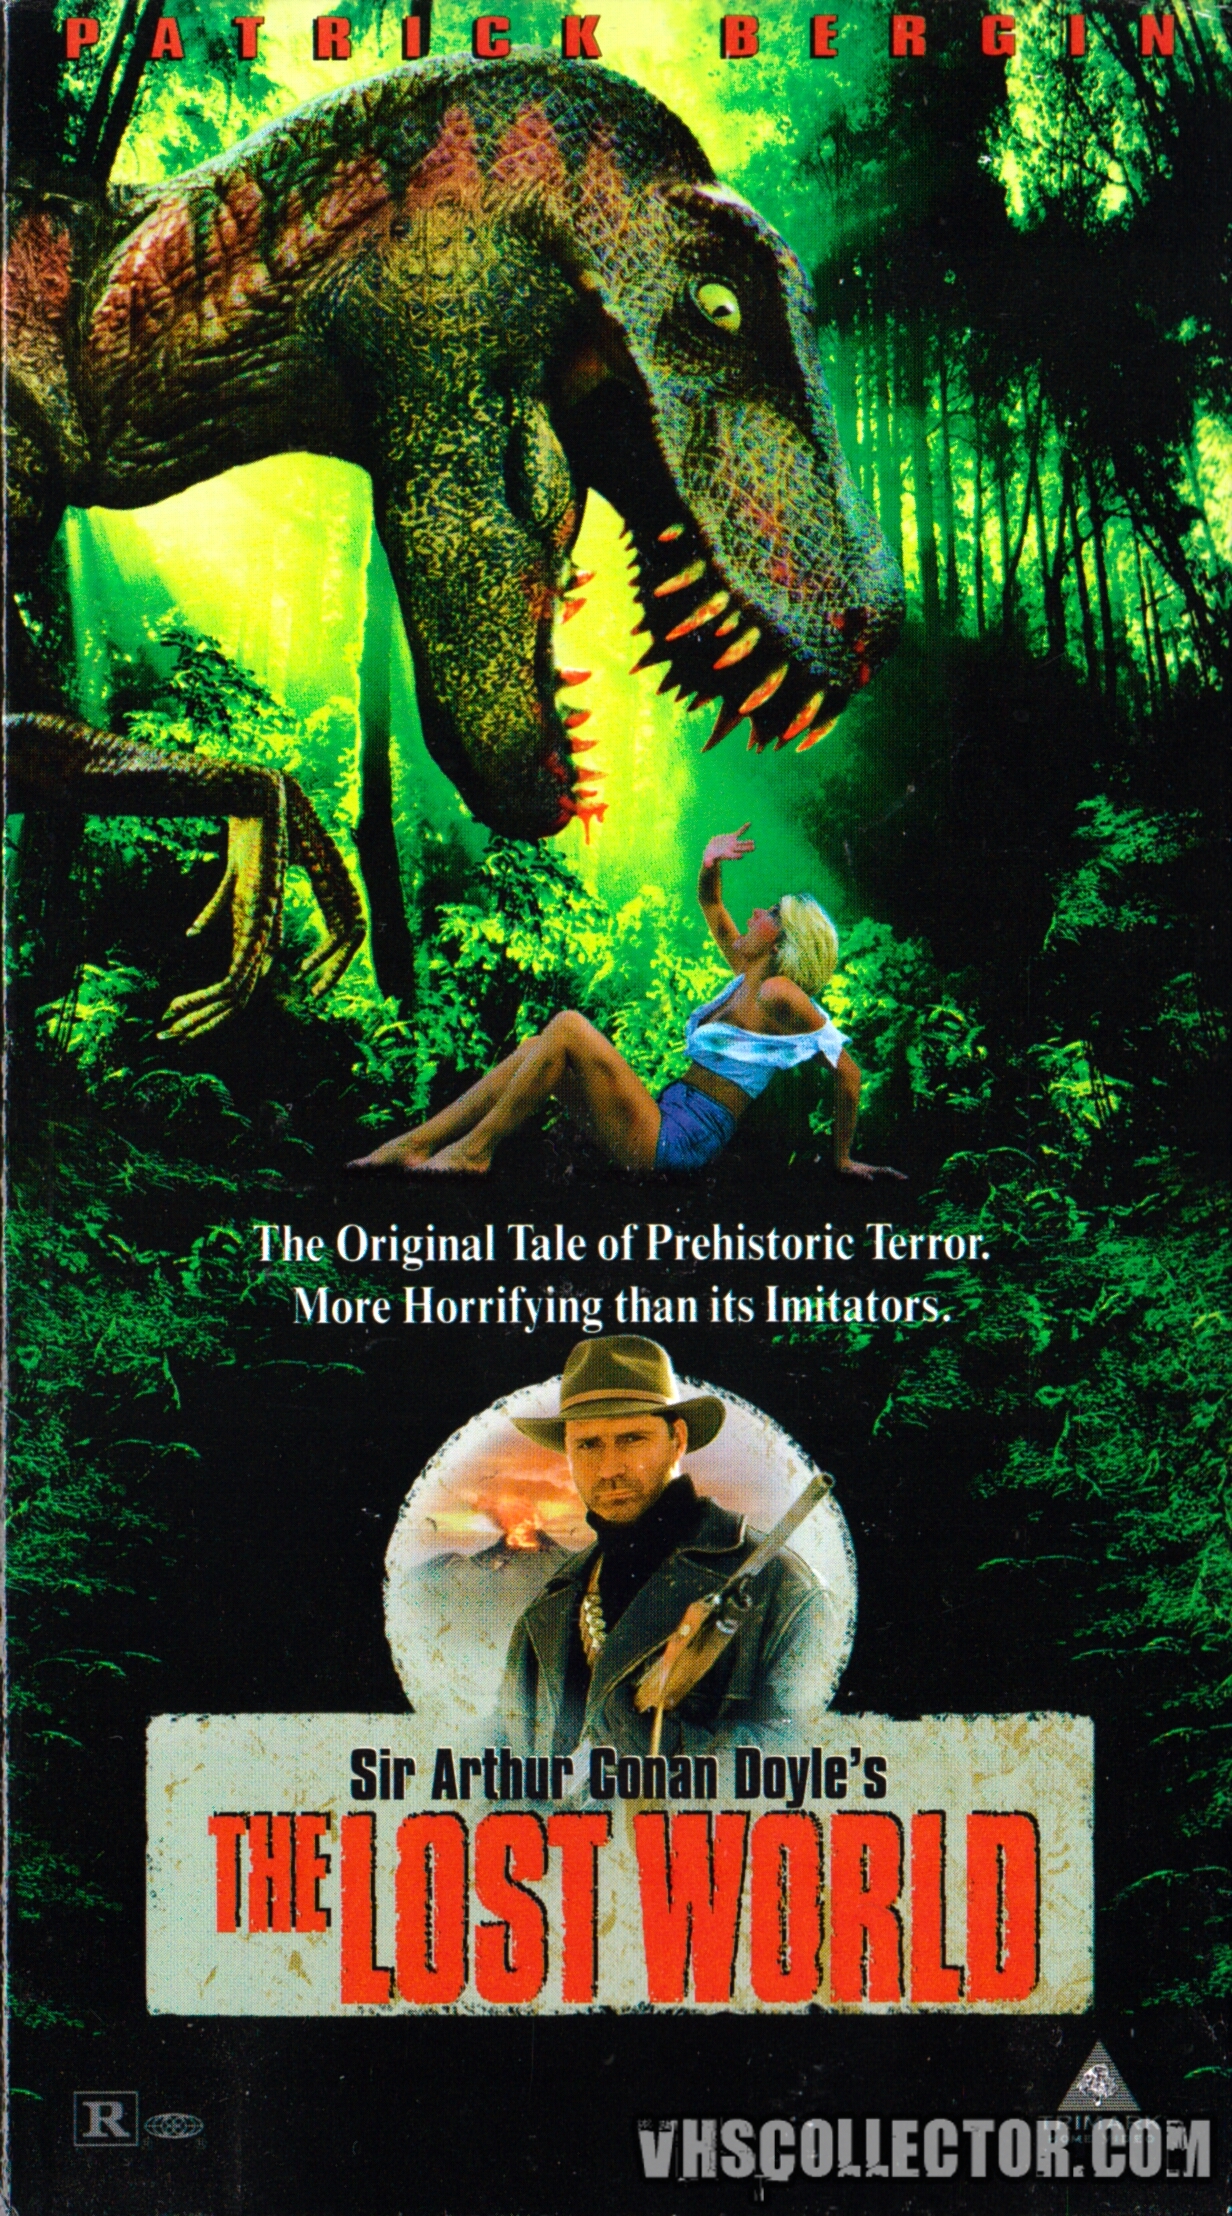 The Lost World | VHSCollector.com